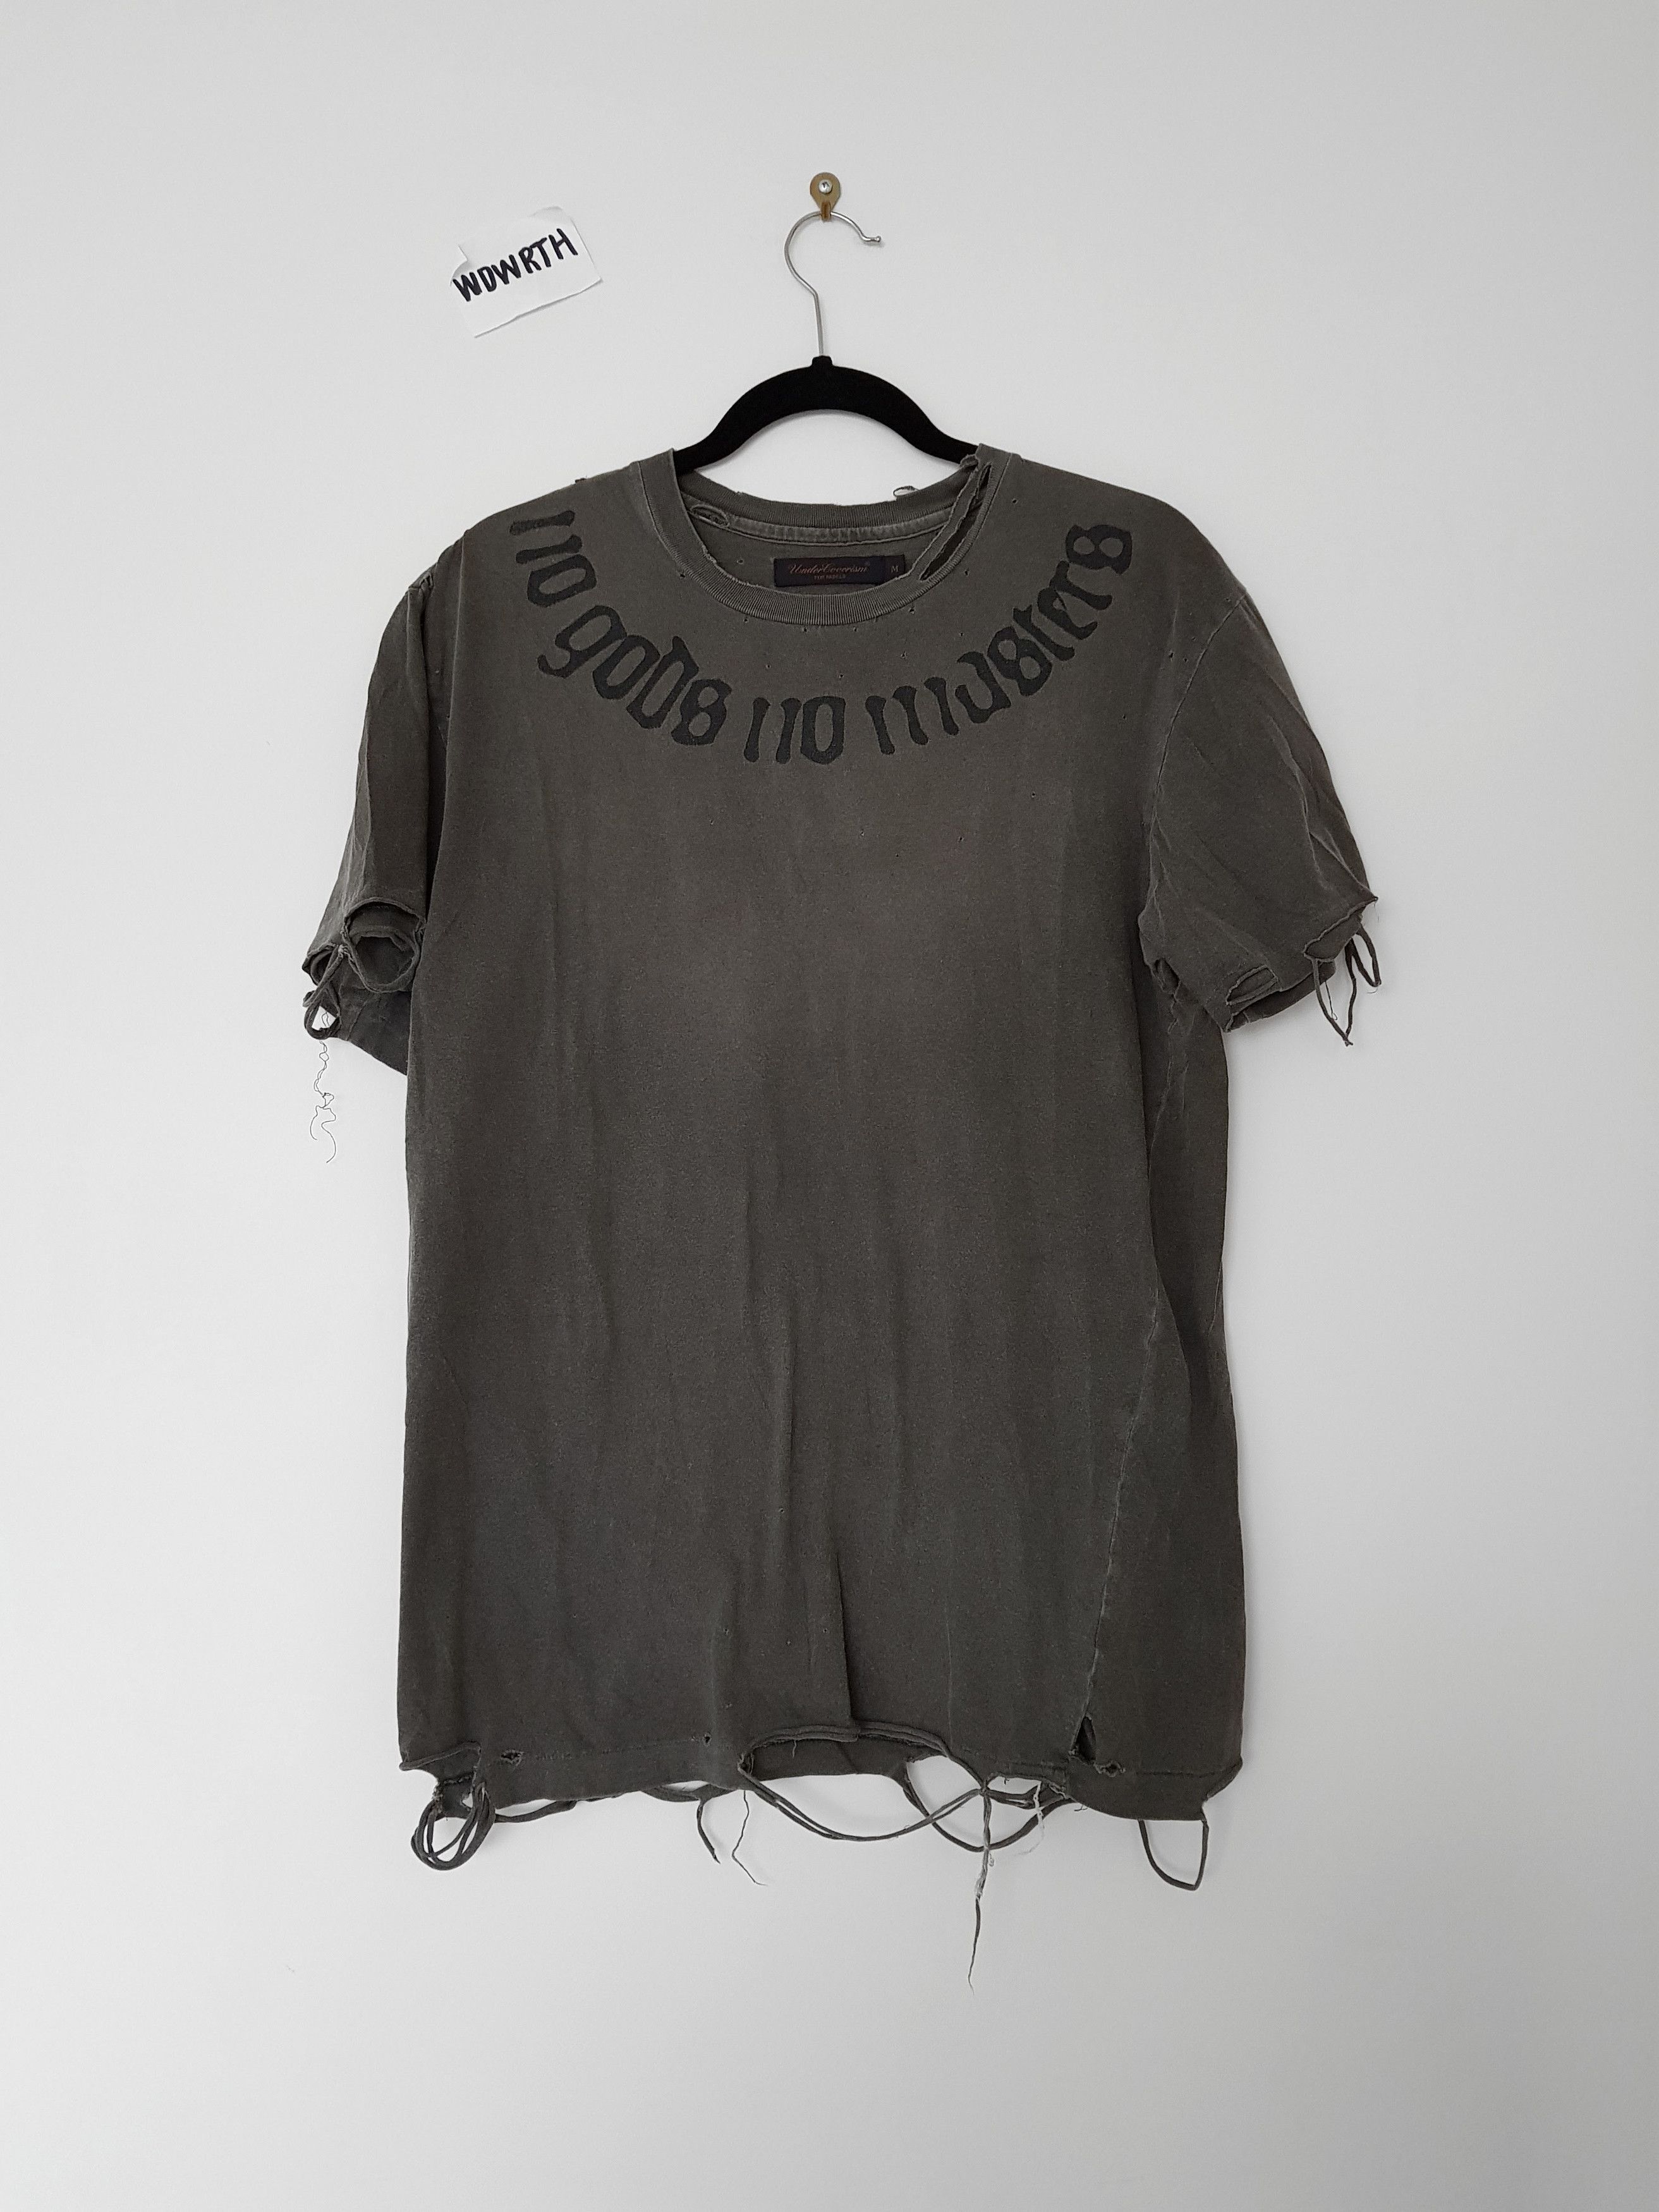 Undercover Undercover SS 03 Scab 'No Gods No Masters' Distressed T